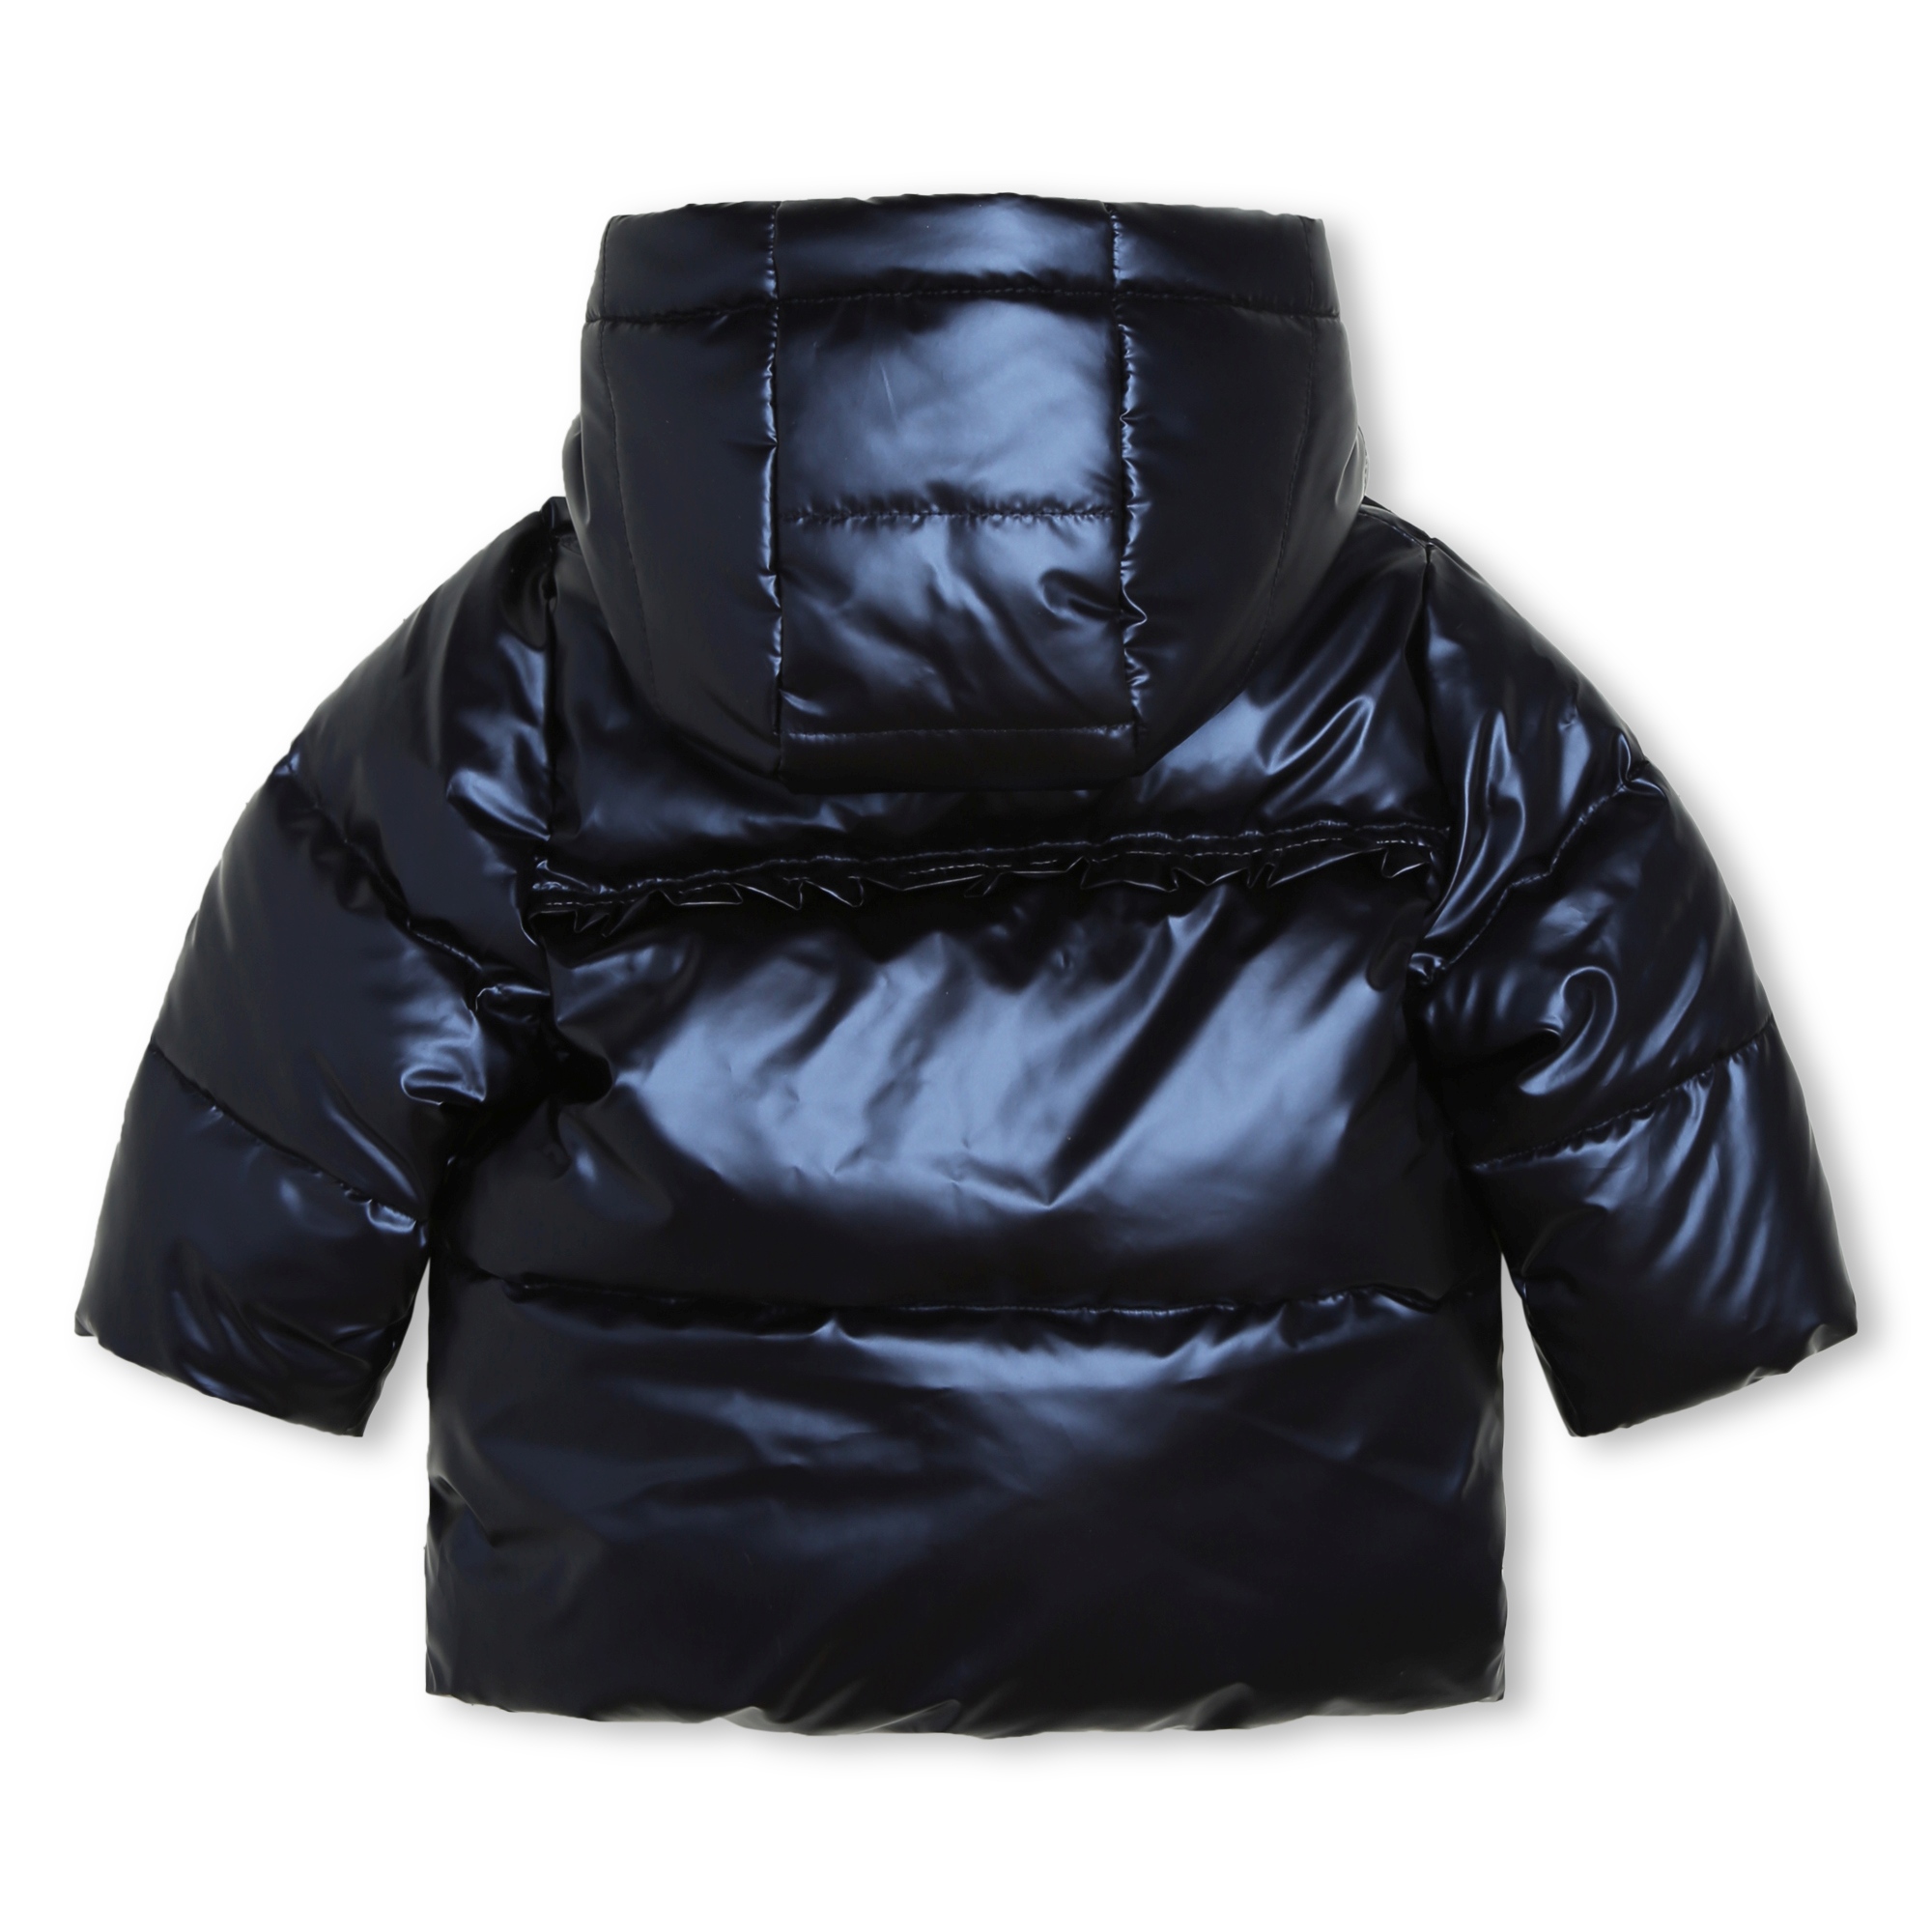 Water-repellent hooded parka CARREMENT BEAU for GIRL